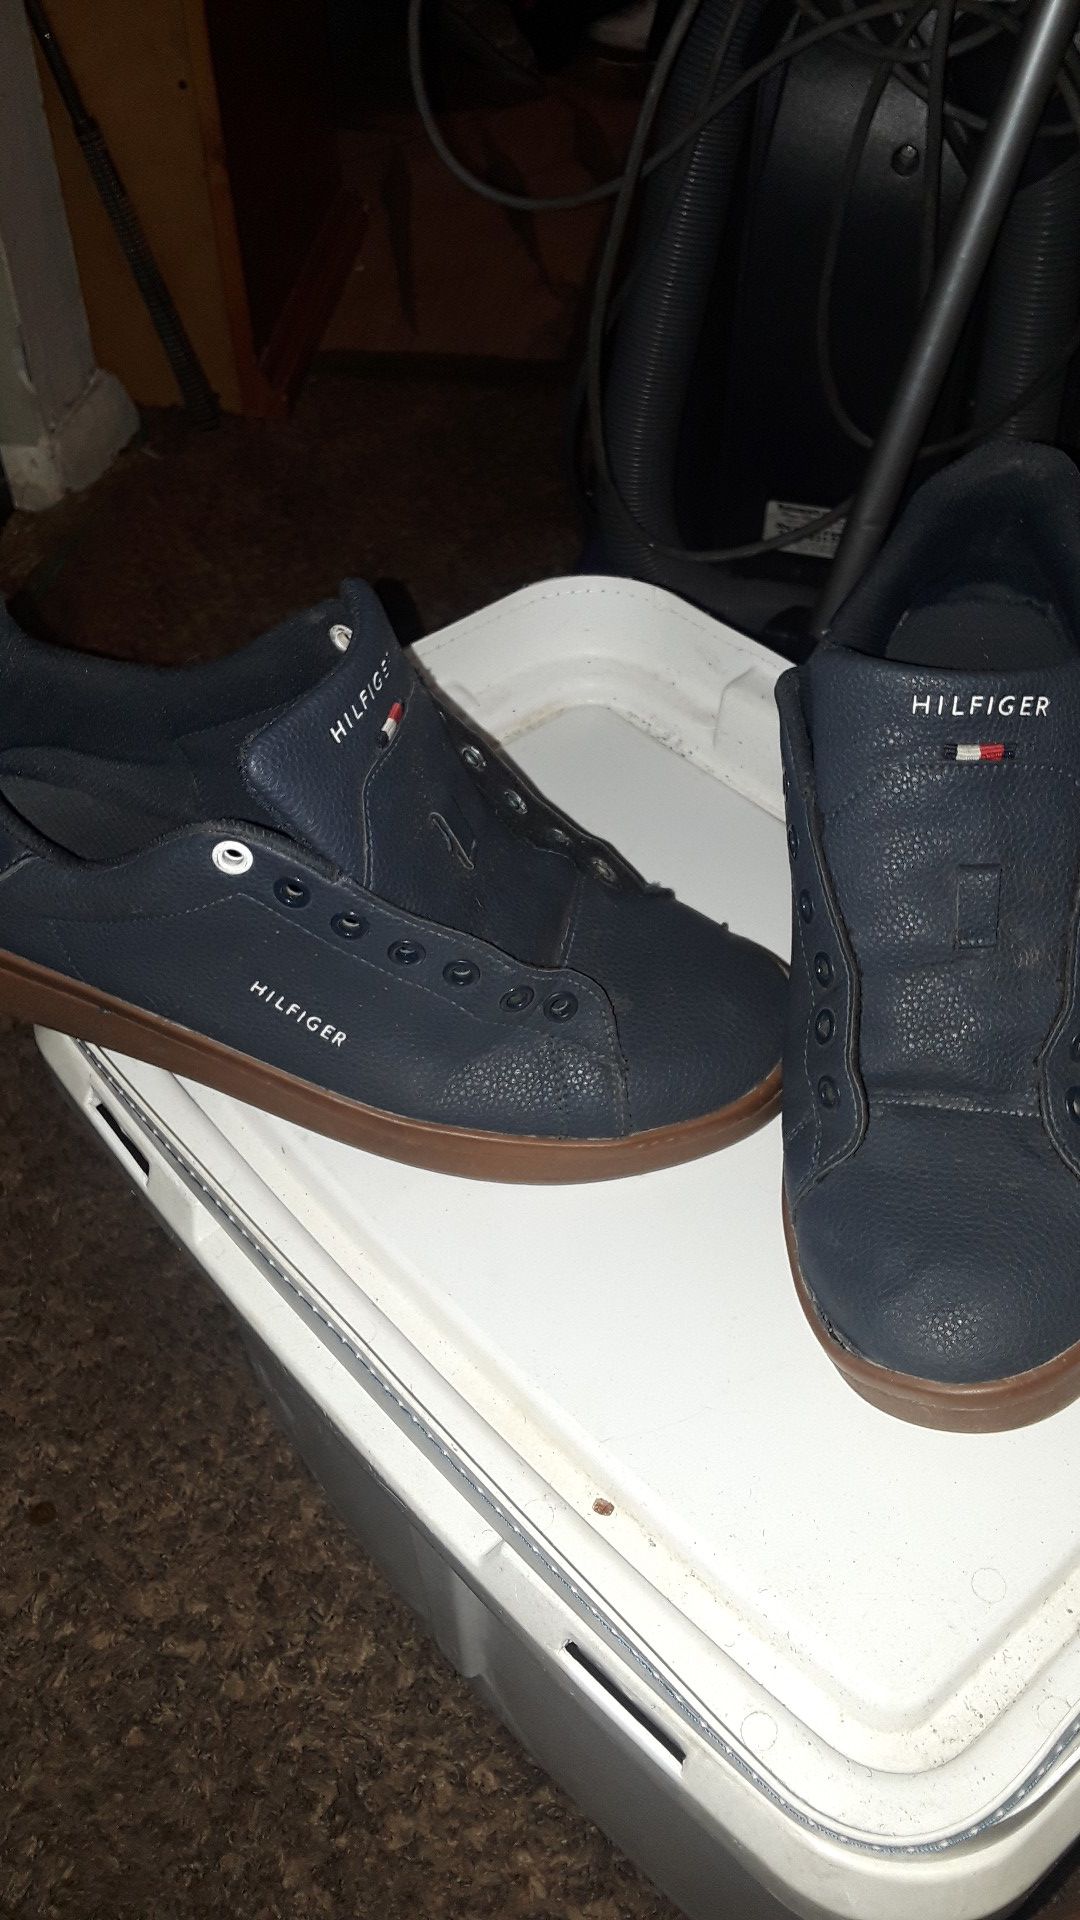 Tommy Hilfiger men's 8 and 1/2 shoes